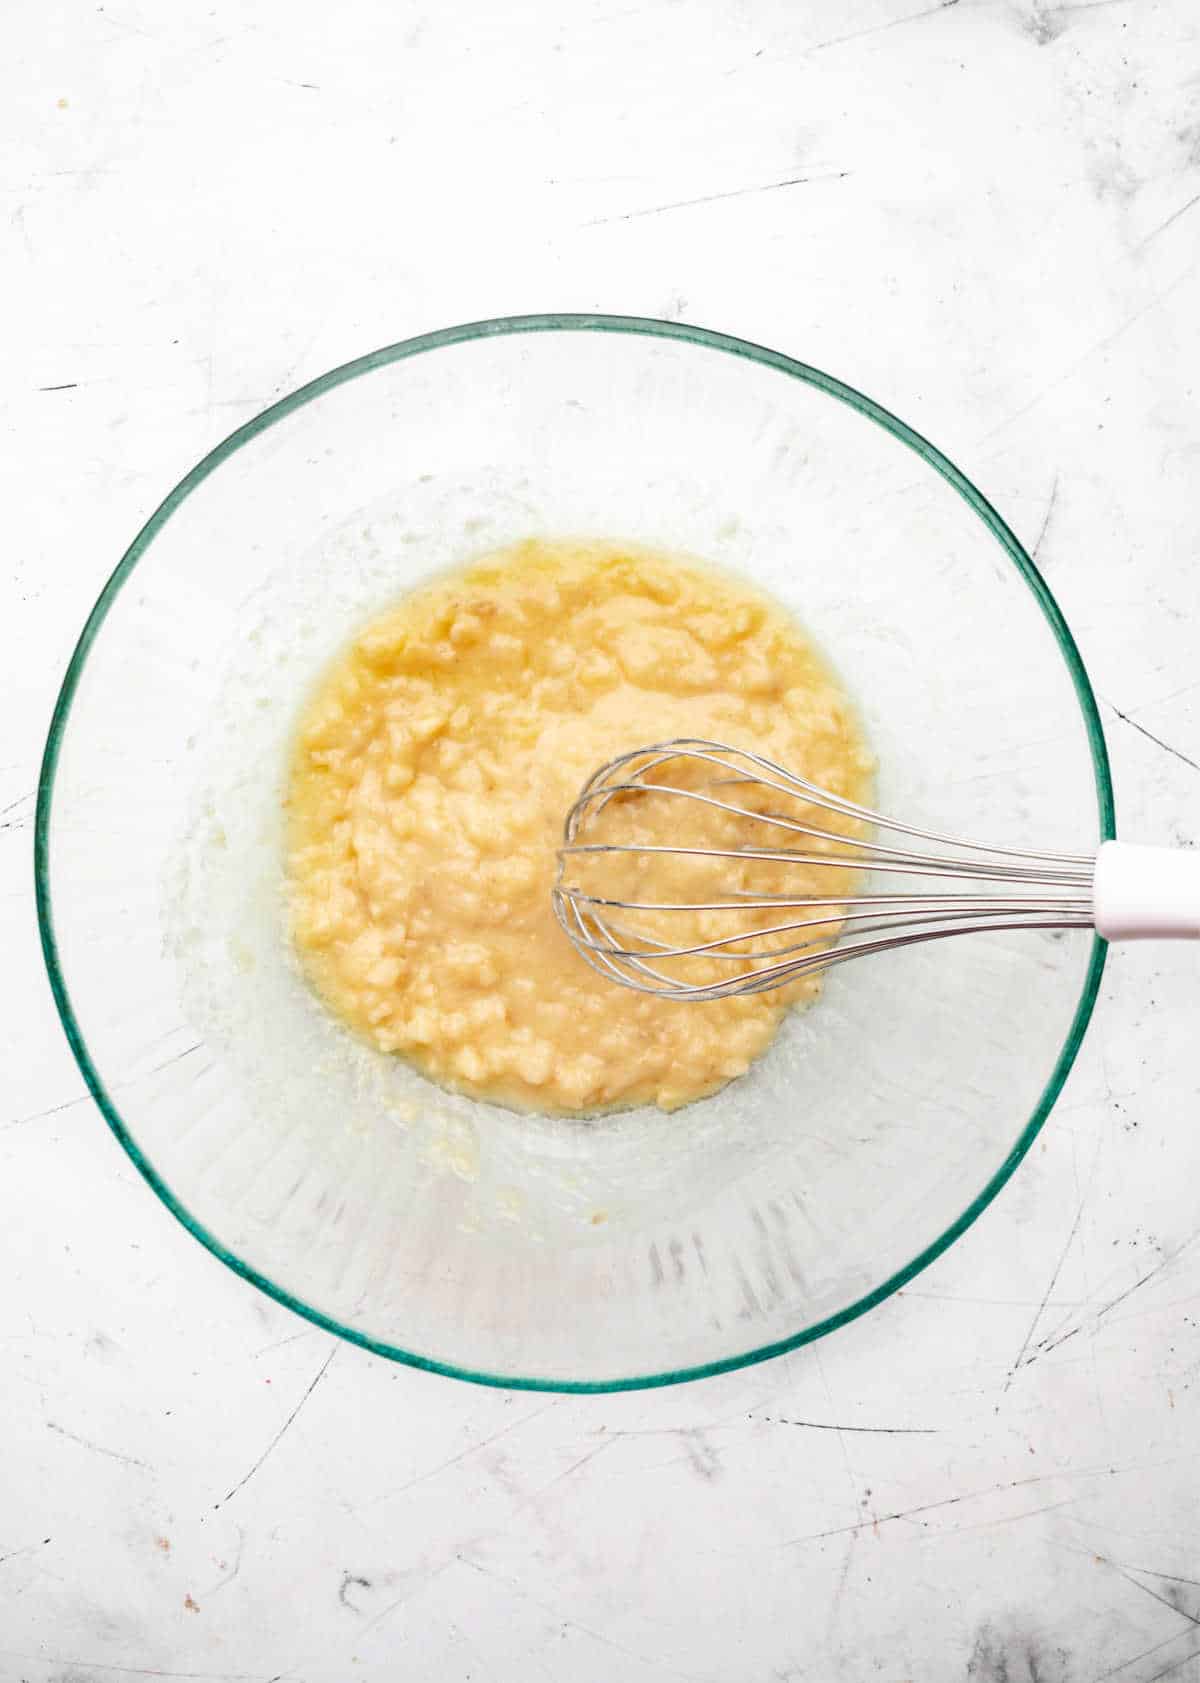 Mashed banana and melted butter mixed in a glass mixing bowl.